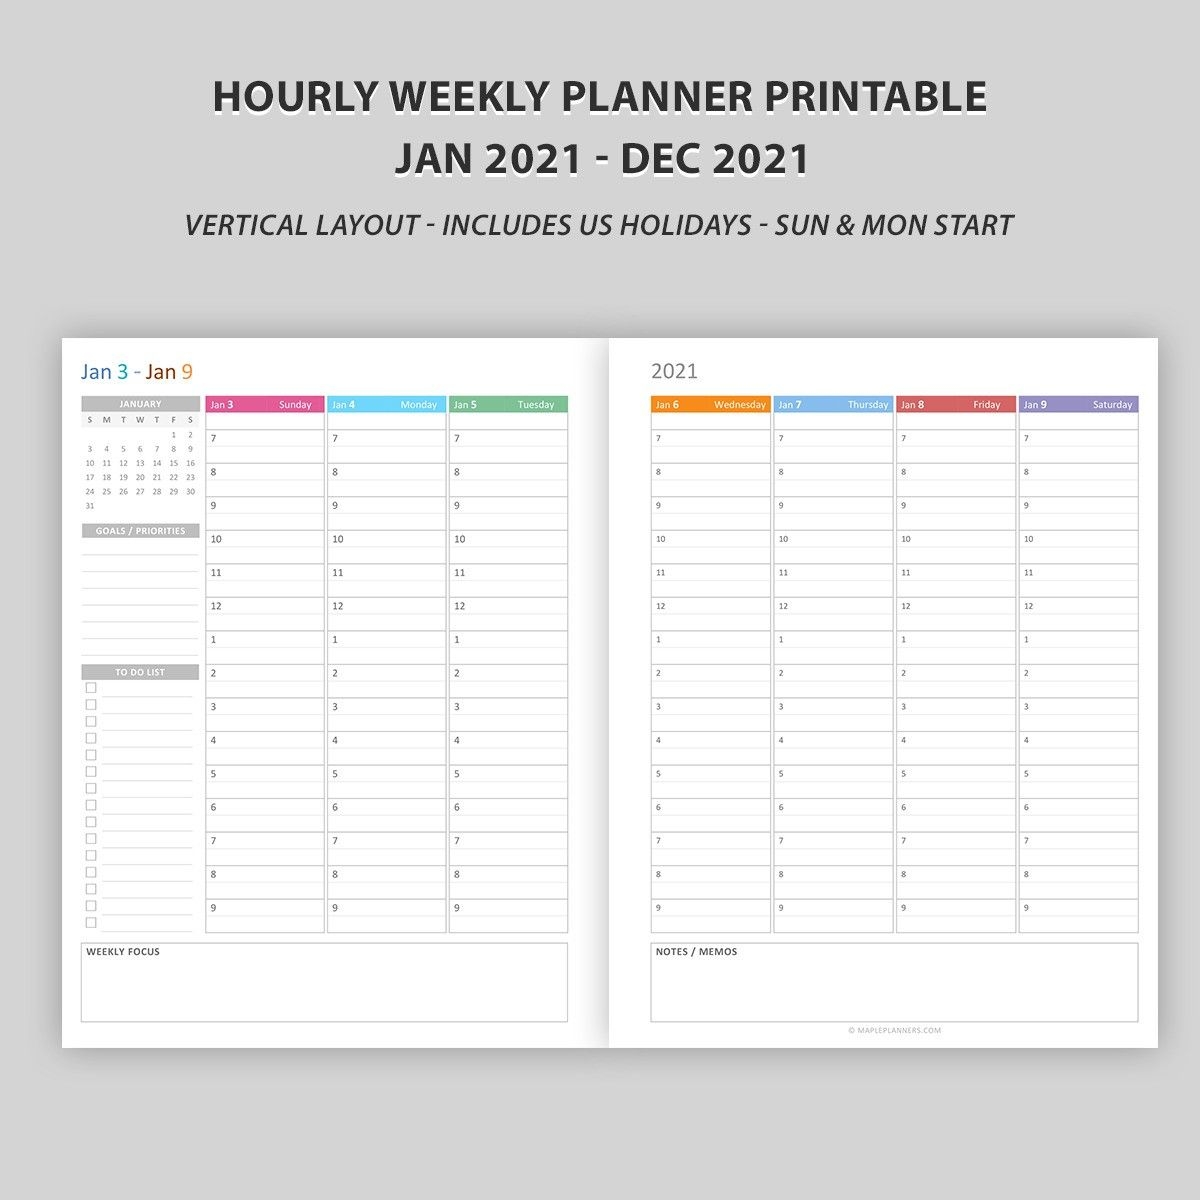 Hourly Weekly Planner 2021 Vertical Layout